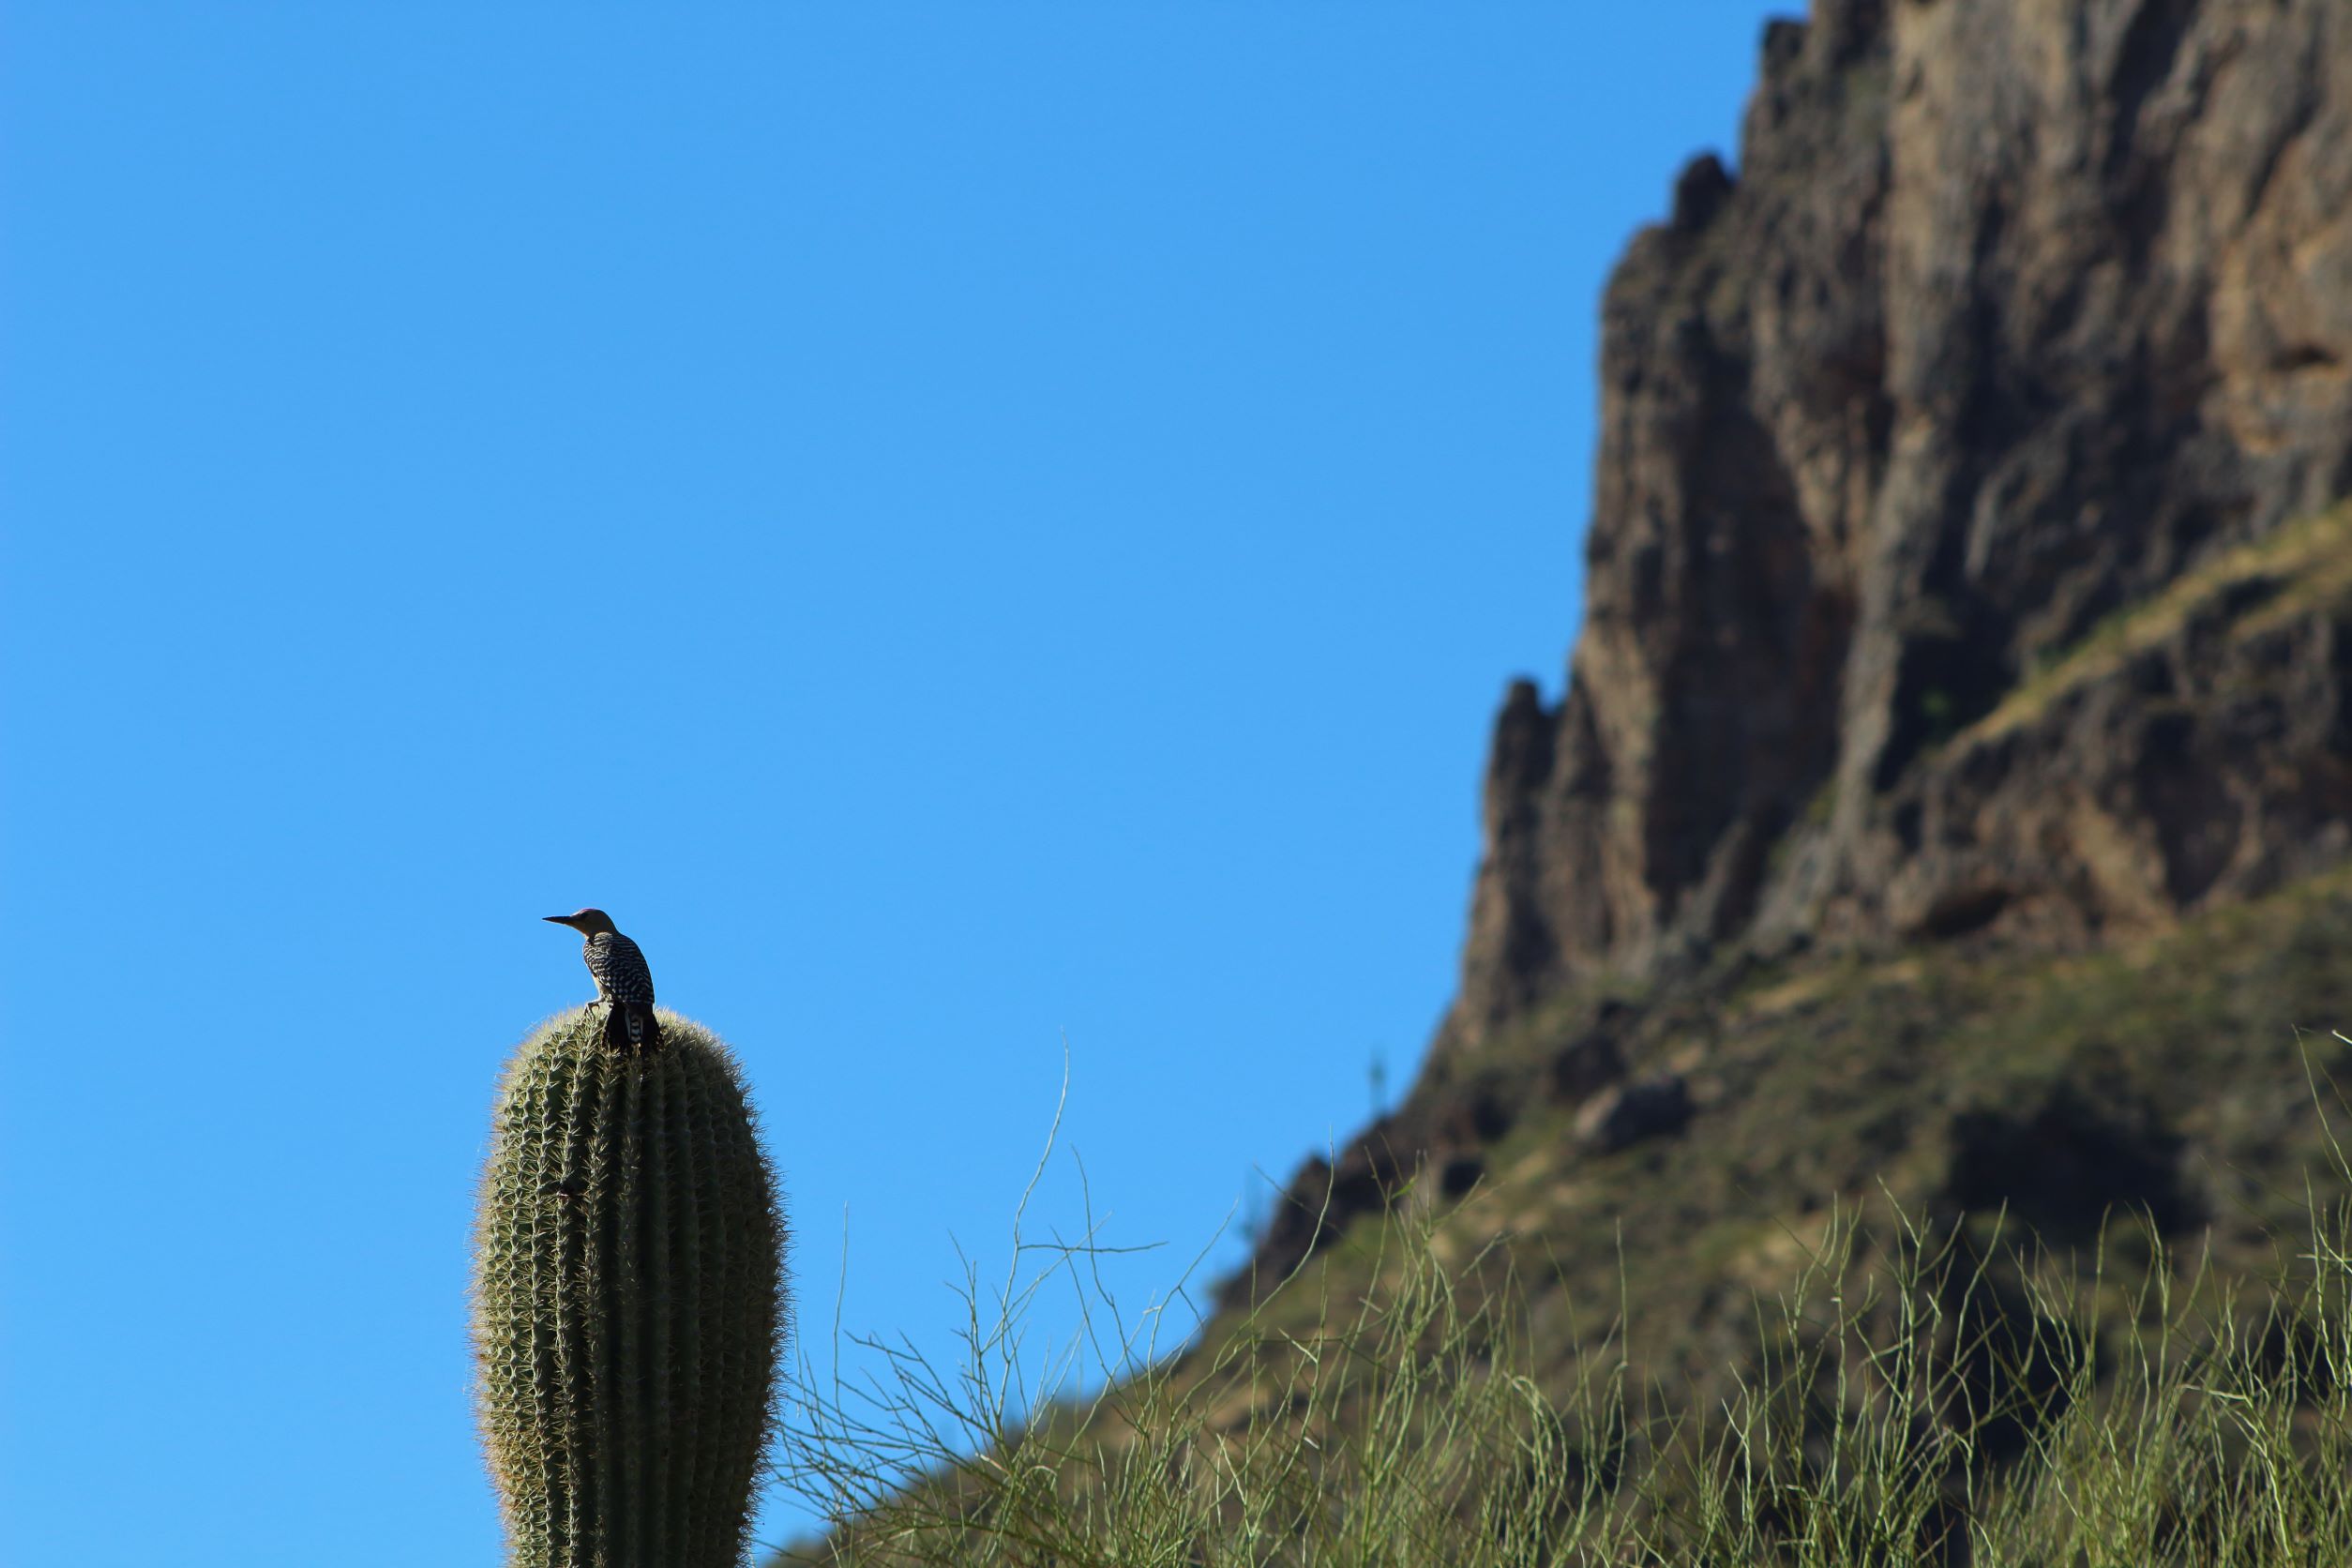 Photo by Patrick Macaulay  |  A shot of a woodpecker atop a saguaro cactus with Picacho Peak in the background. This shot was taken from about 0.5 miles along the Picacho Peak Hunter Trail.